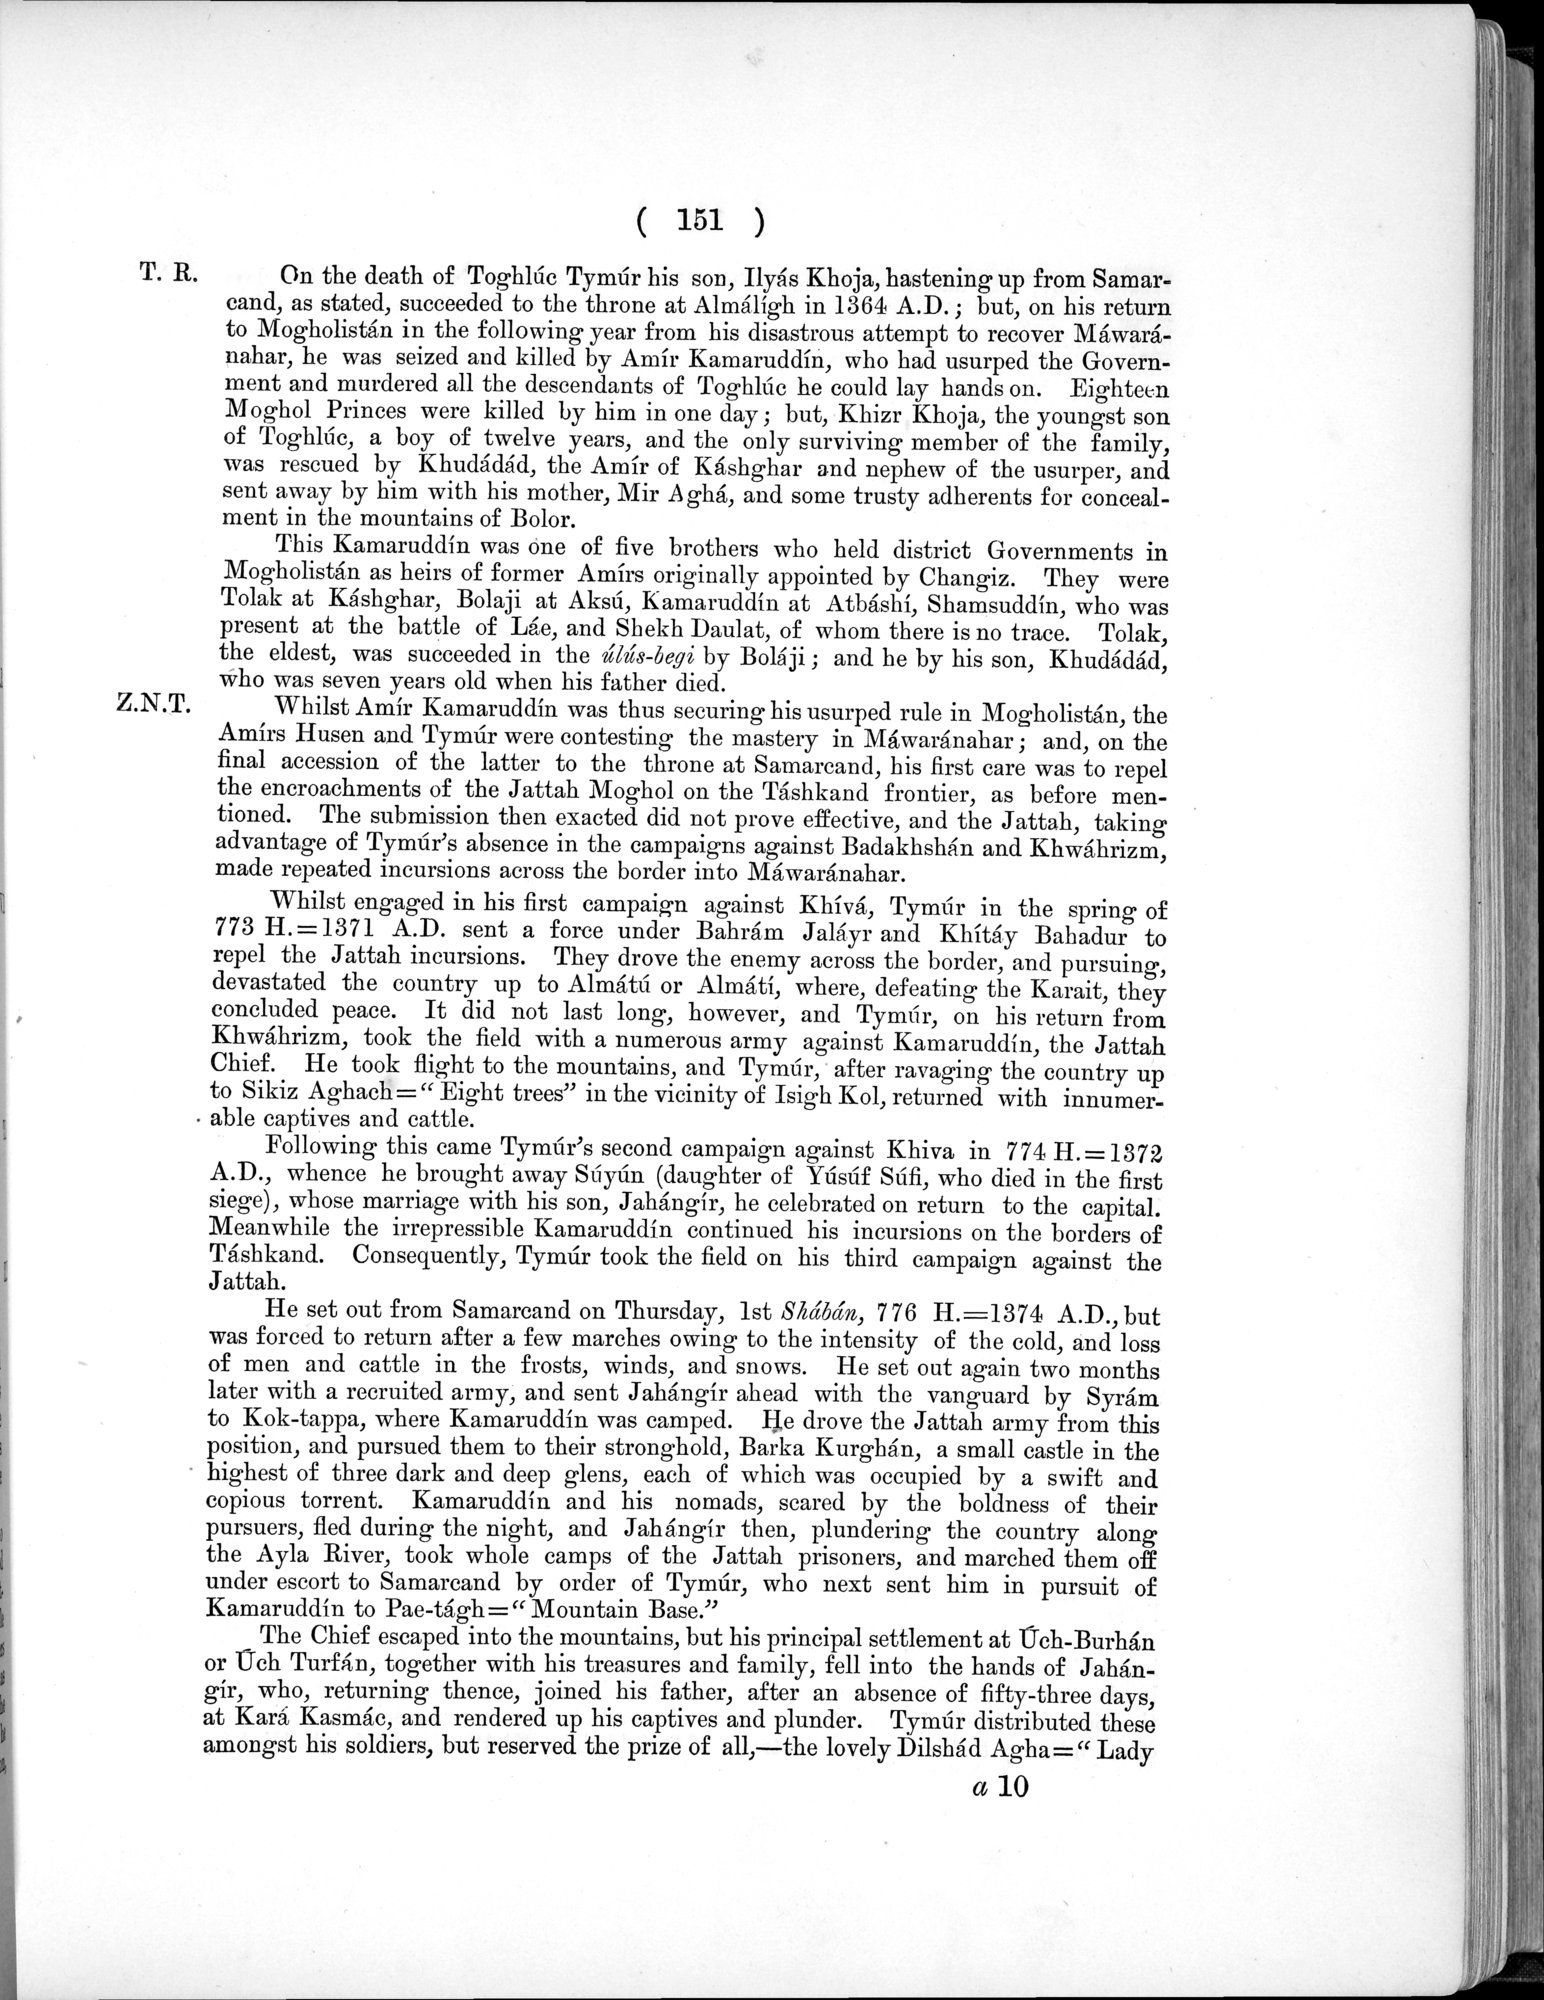 Report of a Mission to Yarkund in 1873 : vol.1 / Page 223 (Grayscale High Resolution Image)